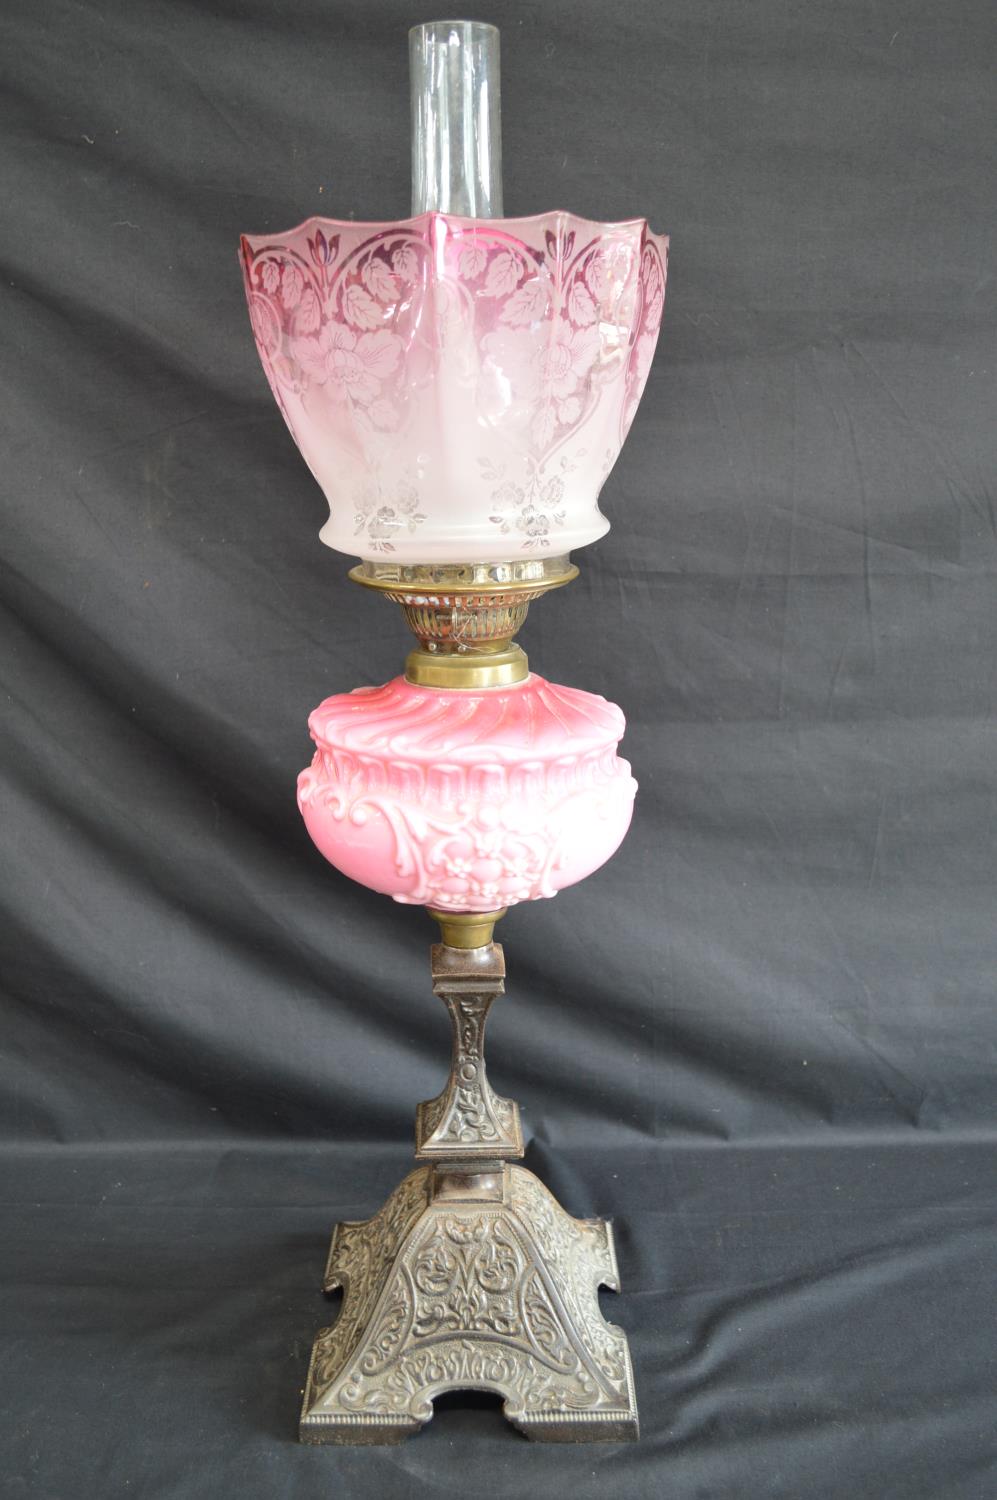 Victorian iron based oil lamp with pink glass reservoir and Cranberry glass shade - 69cm tall - Image 2 of 5